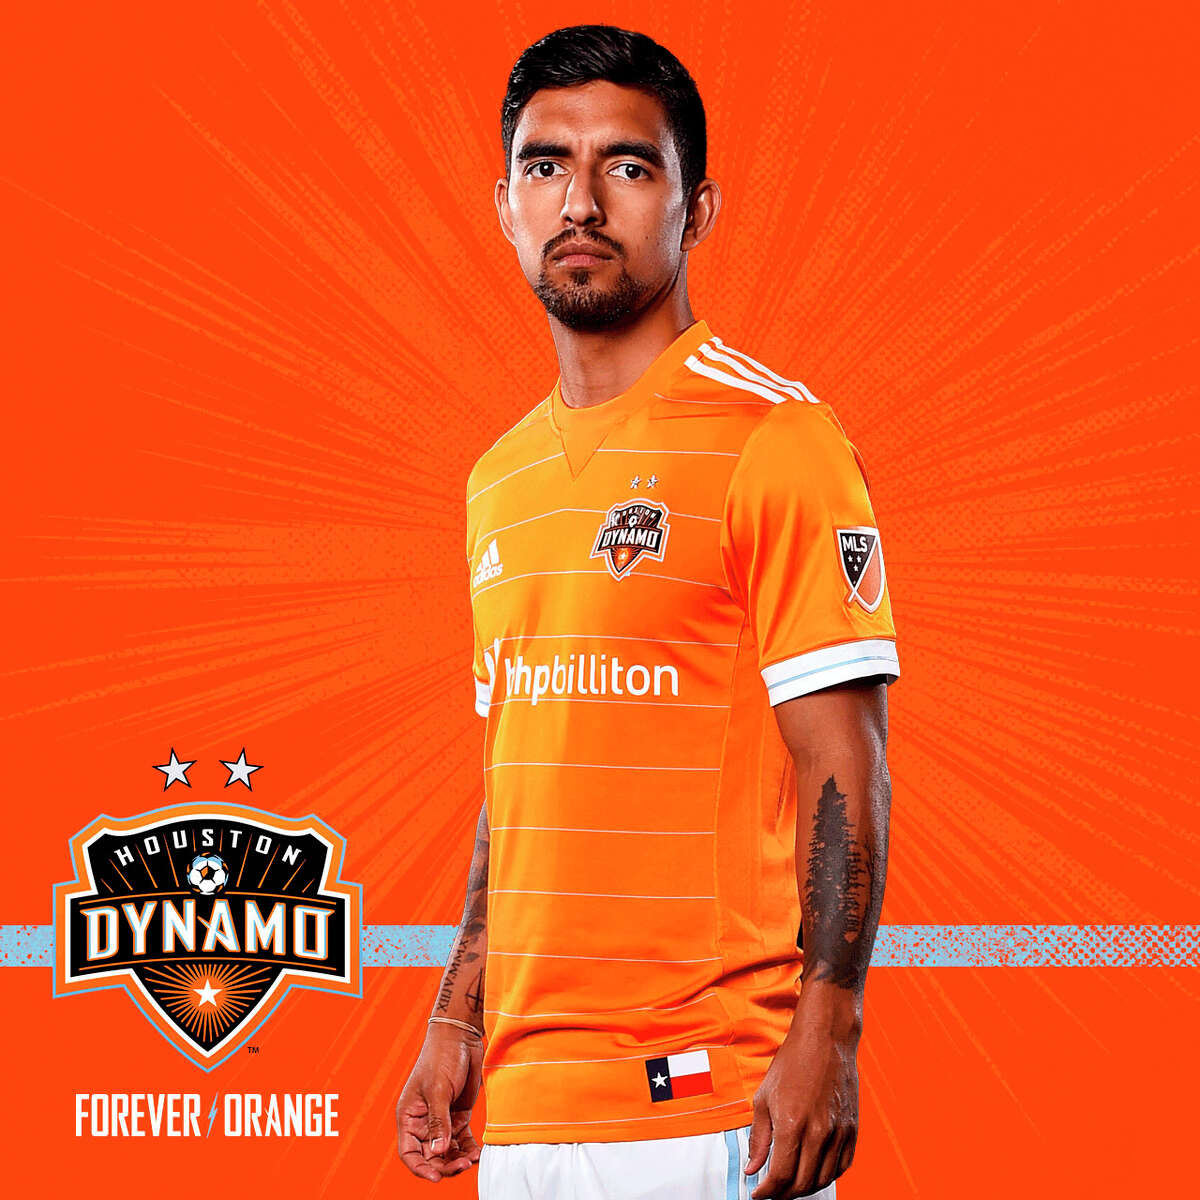 Houston Dynamo A.J. DeLaGarza unveils the new 2017 home kit. Space City Blue returns to the home kit for the first time since 2010, with blue horizontal pinstripes accenting the clubÂ?’s traditional orange shirt. The rest of the kit features white shorts with Space City Blue accent stripes, leaving behind the traditional orange stripes, and orange socks with Space City Blue pinstripes to match the jersey. Â The club motto, Â?“FOREVER ORANGE,Â?” is on the back of the jersey beneath the collar, and the front of the jersey bears the club crest with two silver stars representing the clubÂ?’s back-to-back MLS Cup wins in 2006 and 2007.